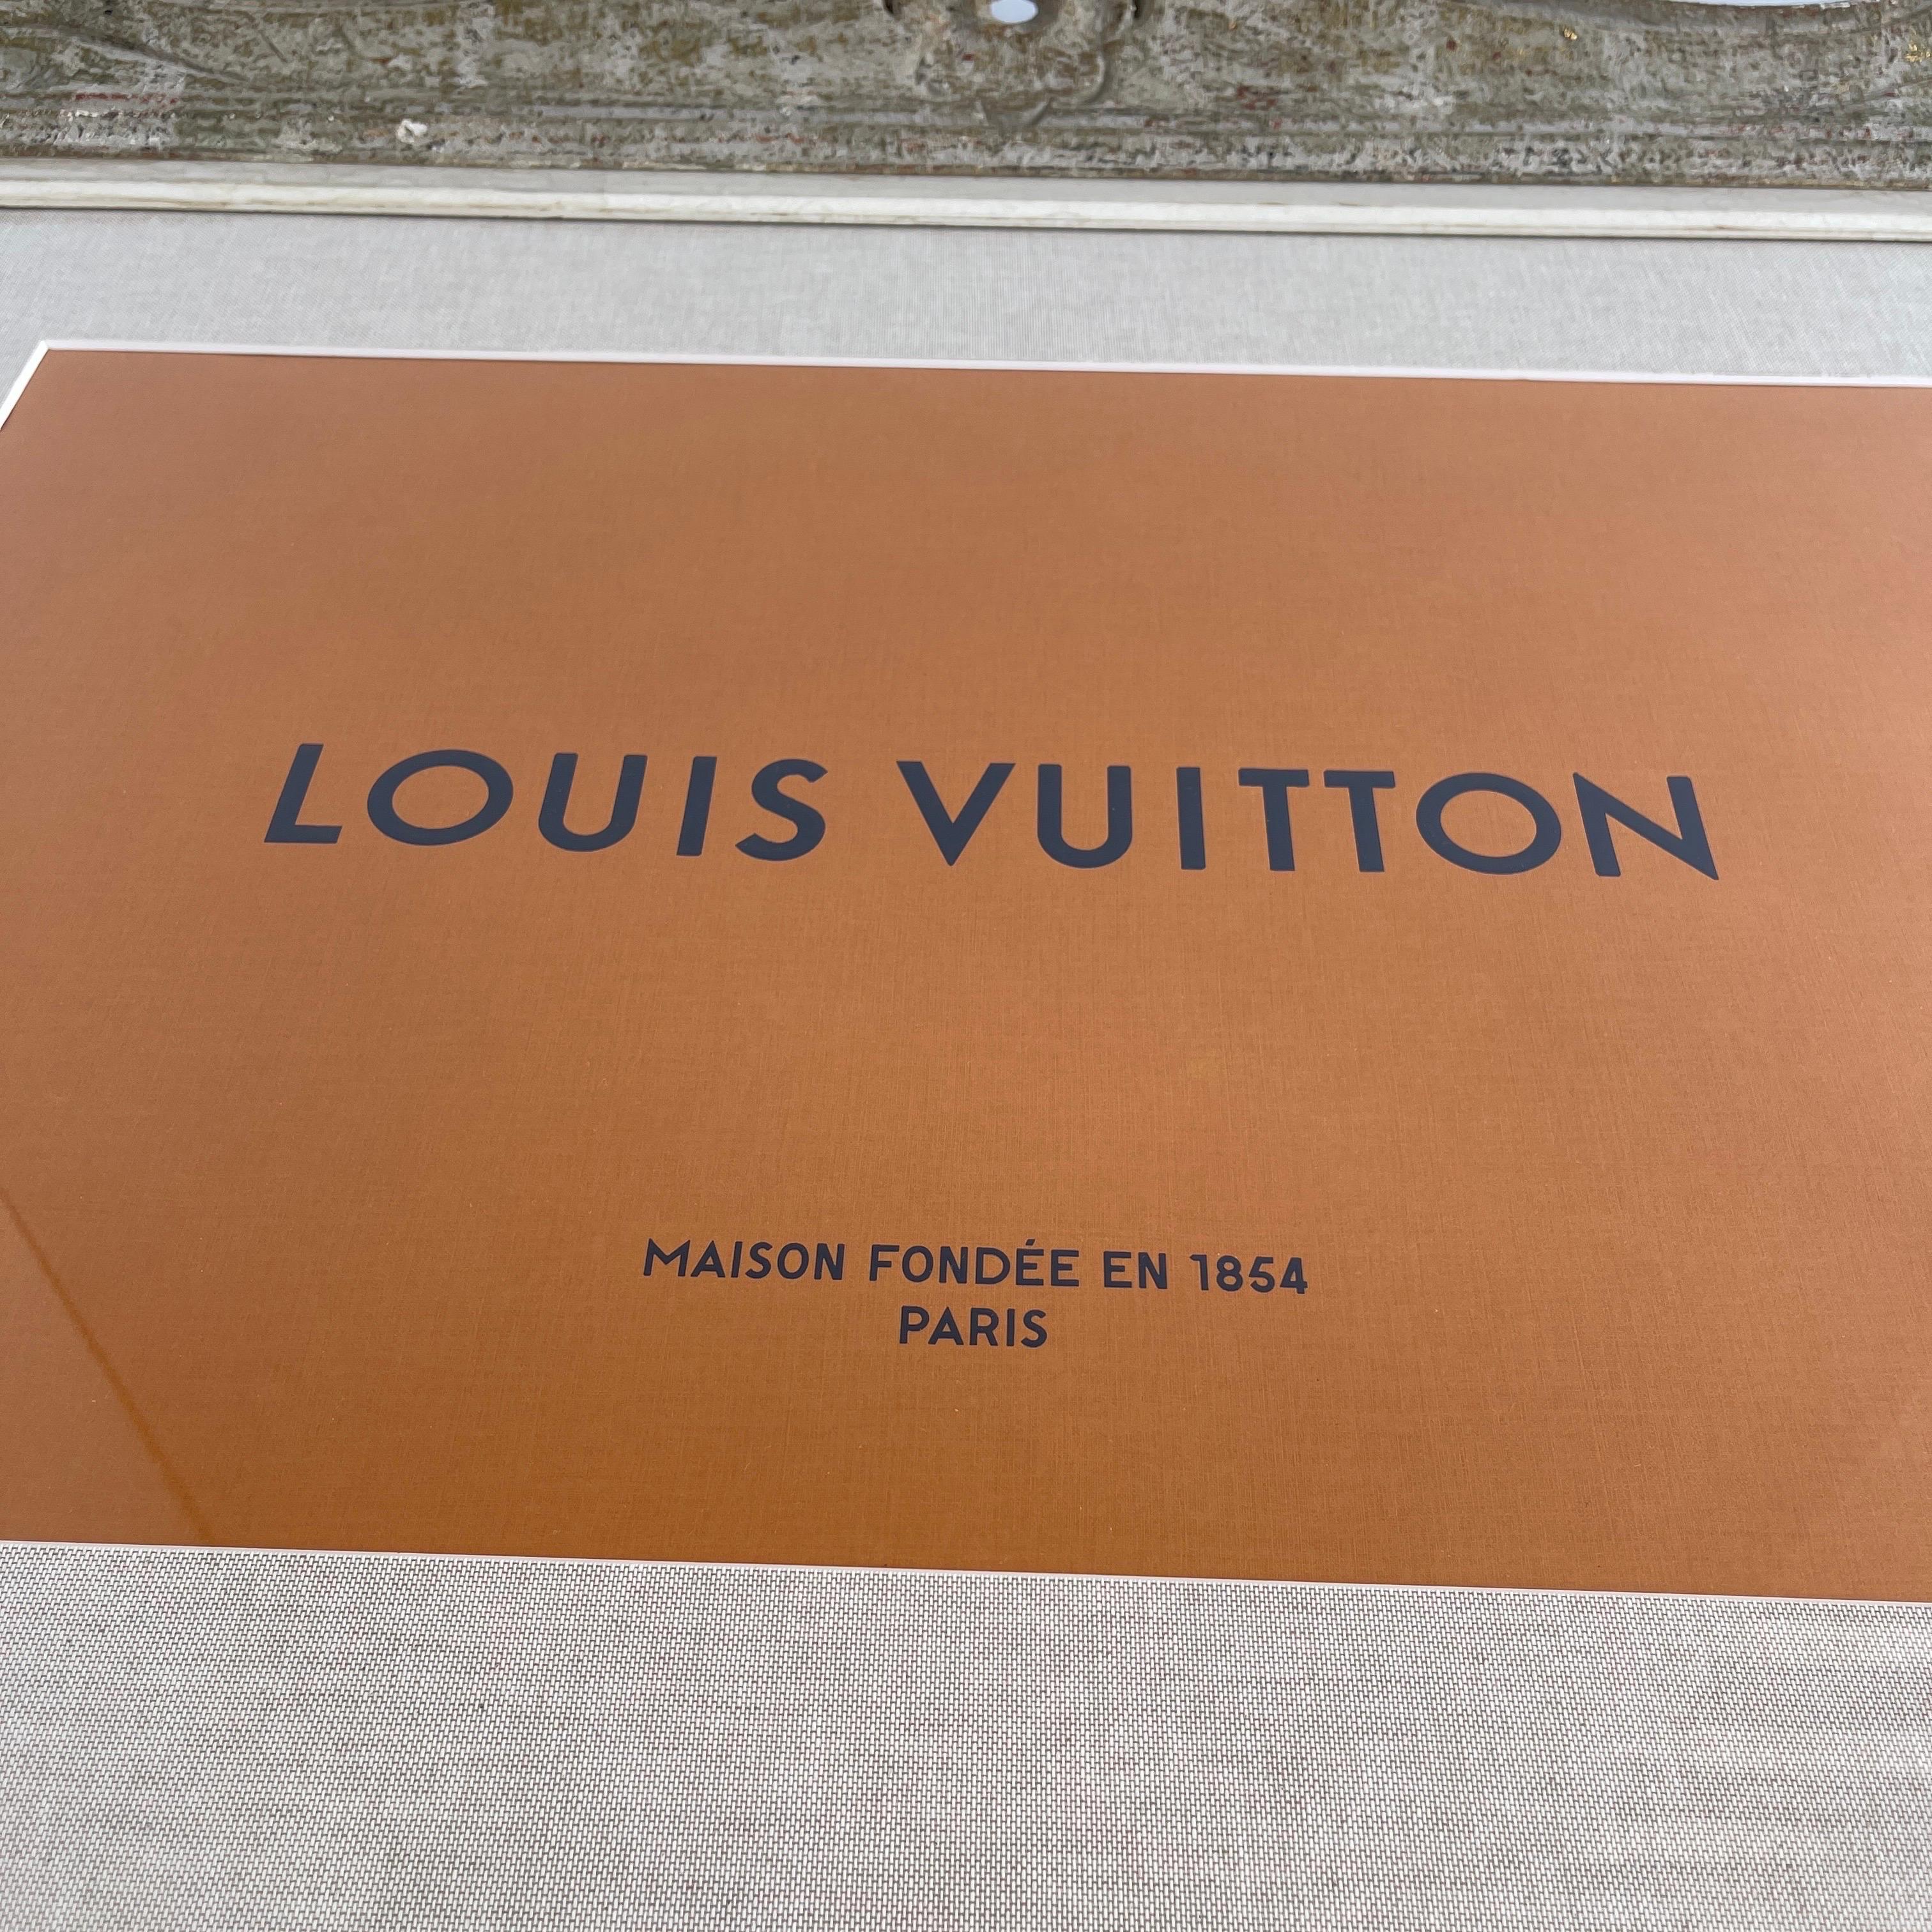 Large Gustavian Style Grey Painted Frame With Orange Louis Vuitton Print Artwork

One-of-a-kind Louis Vuitton printed artwork framed with classic style linen mat and vintage frame with amazing patina from the 1960's. Wonderful conversation piece of